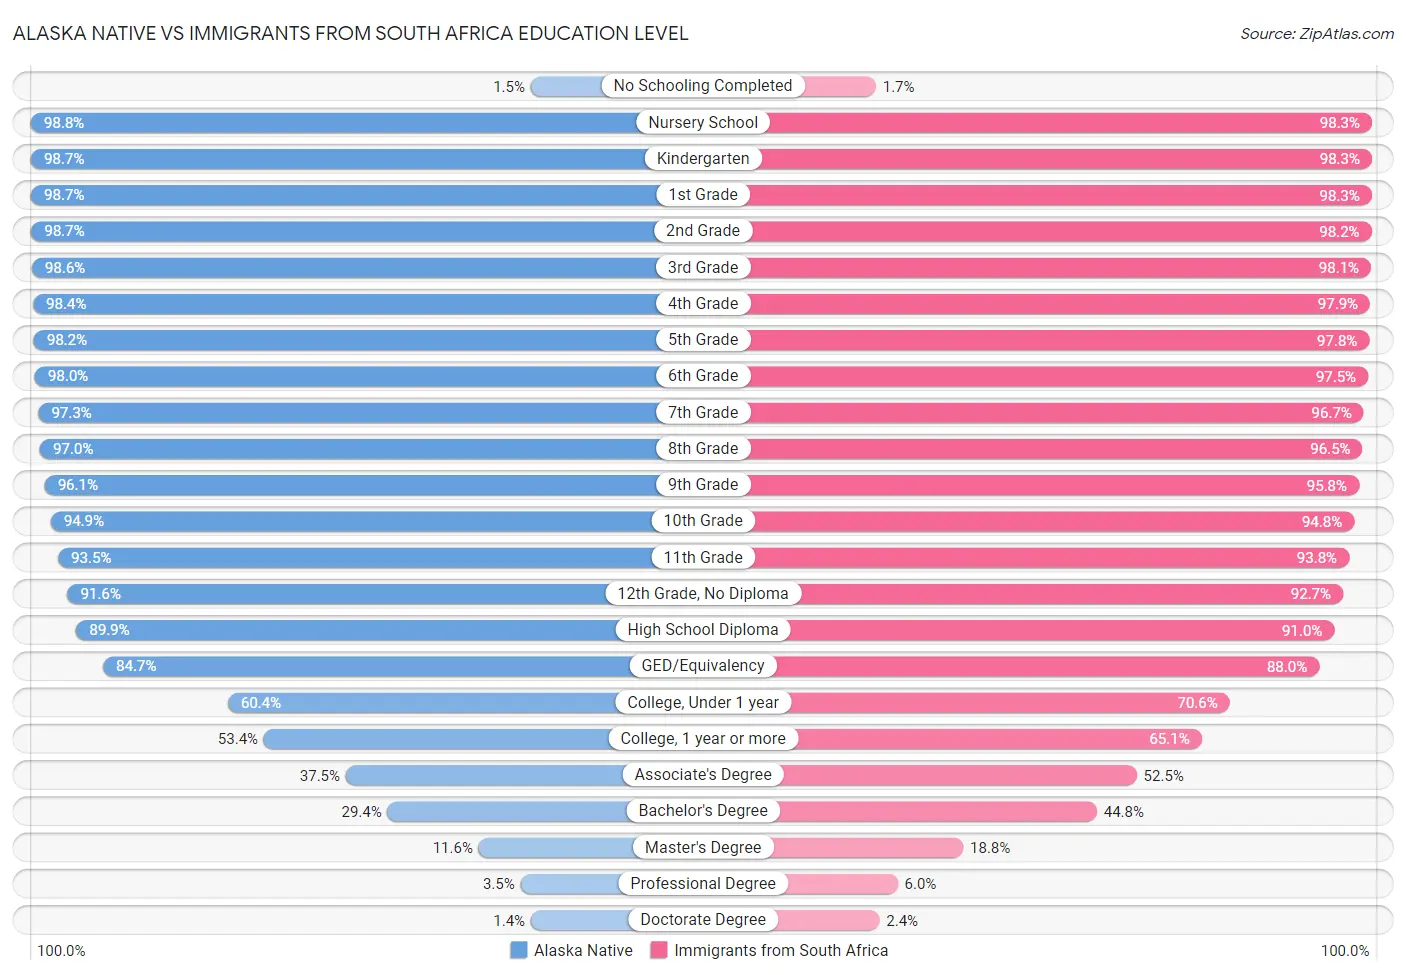 Alaska Native vs Immigrants from South Africa Education Level